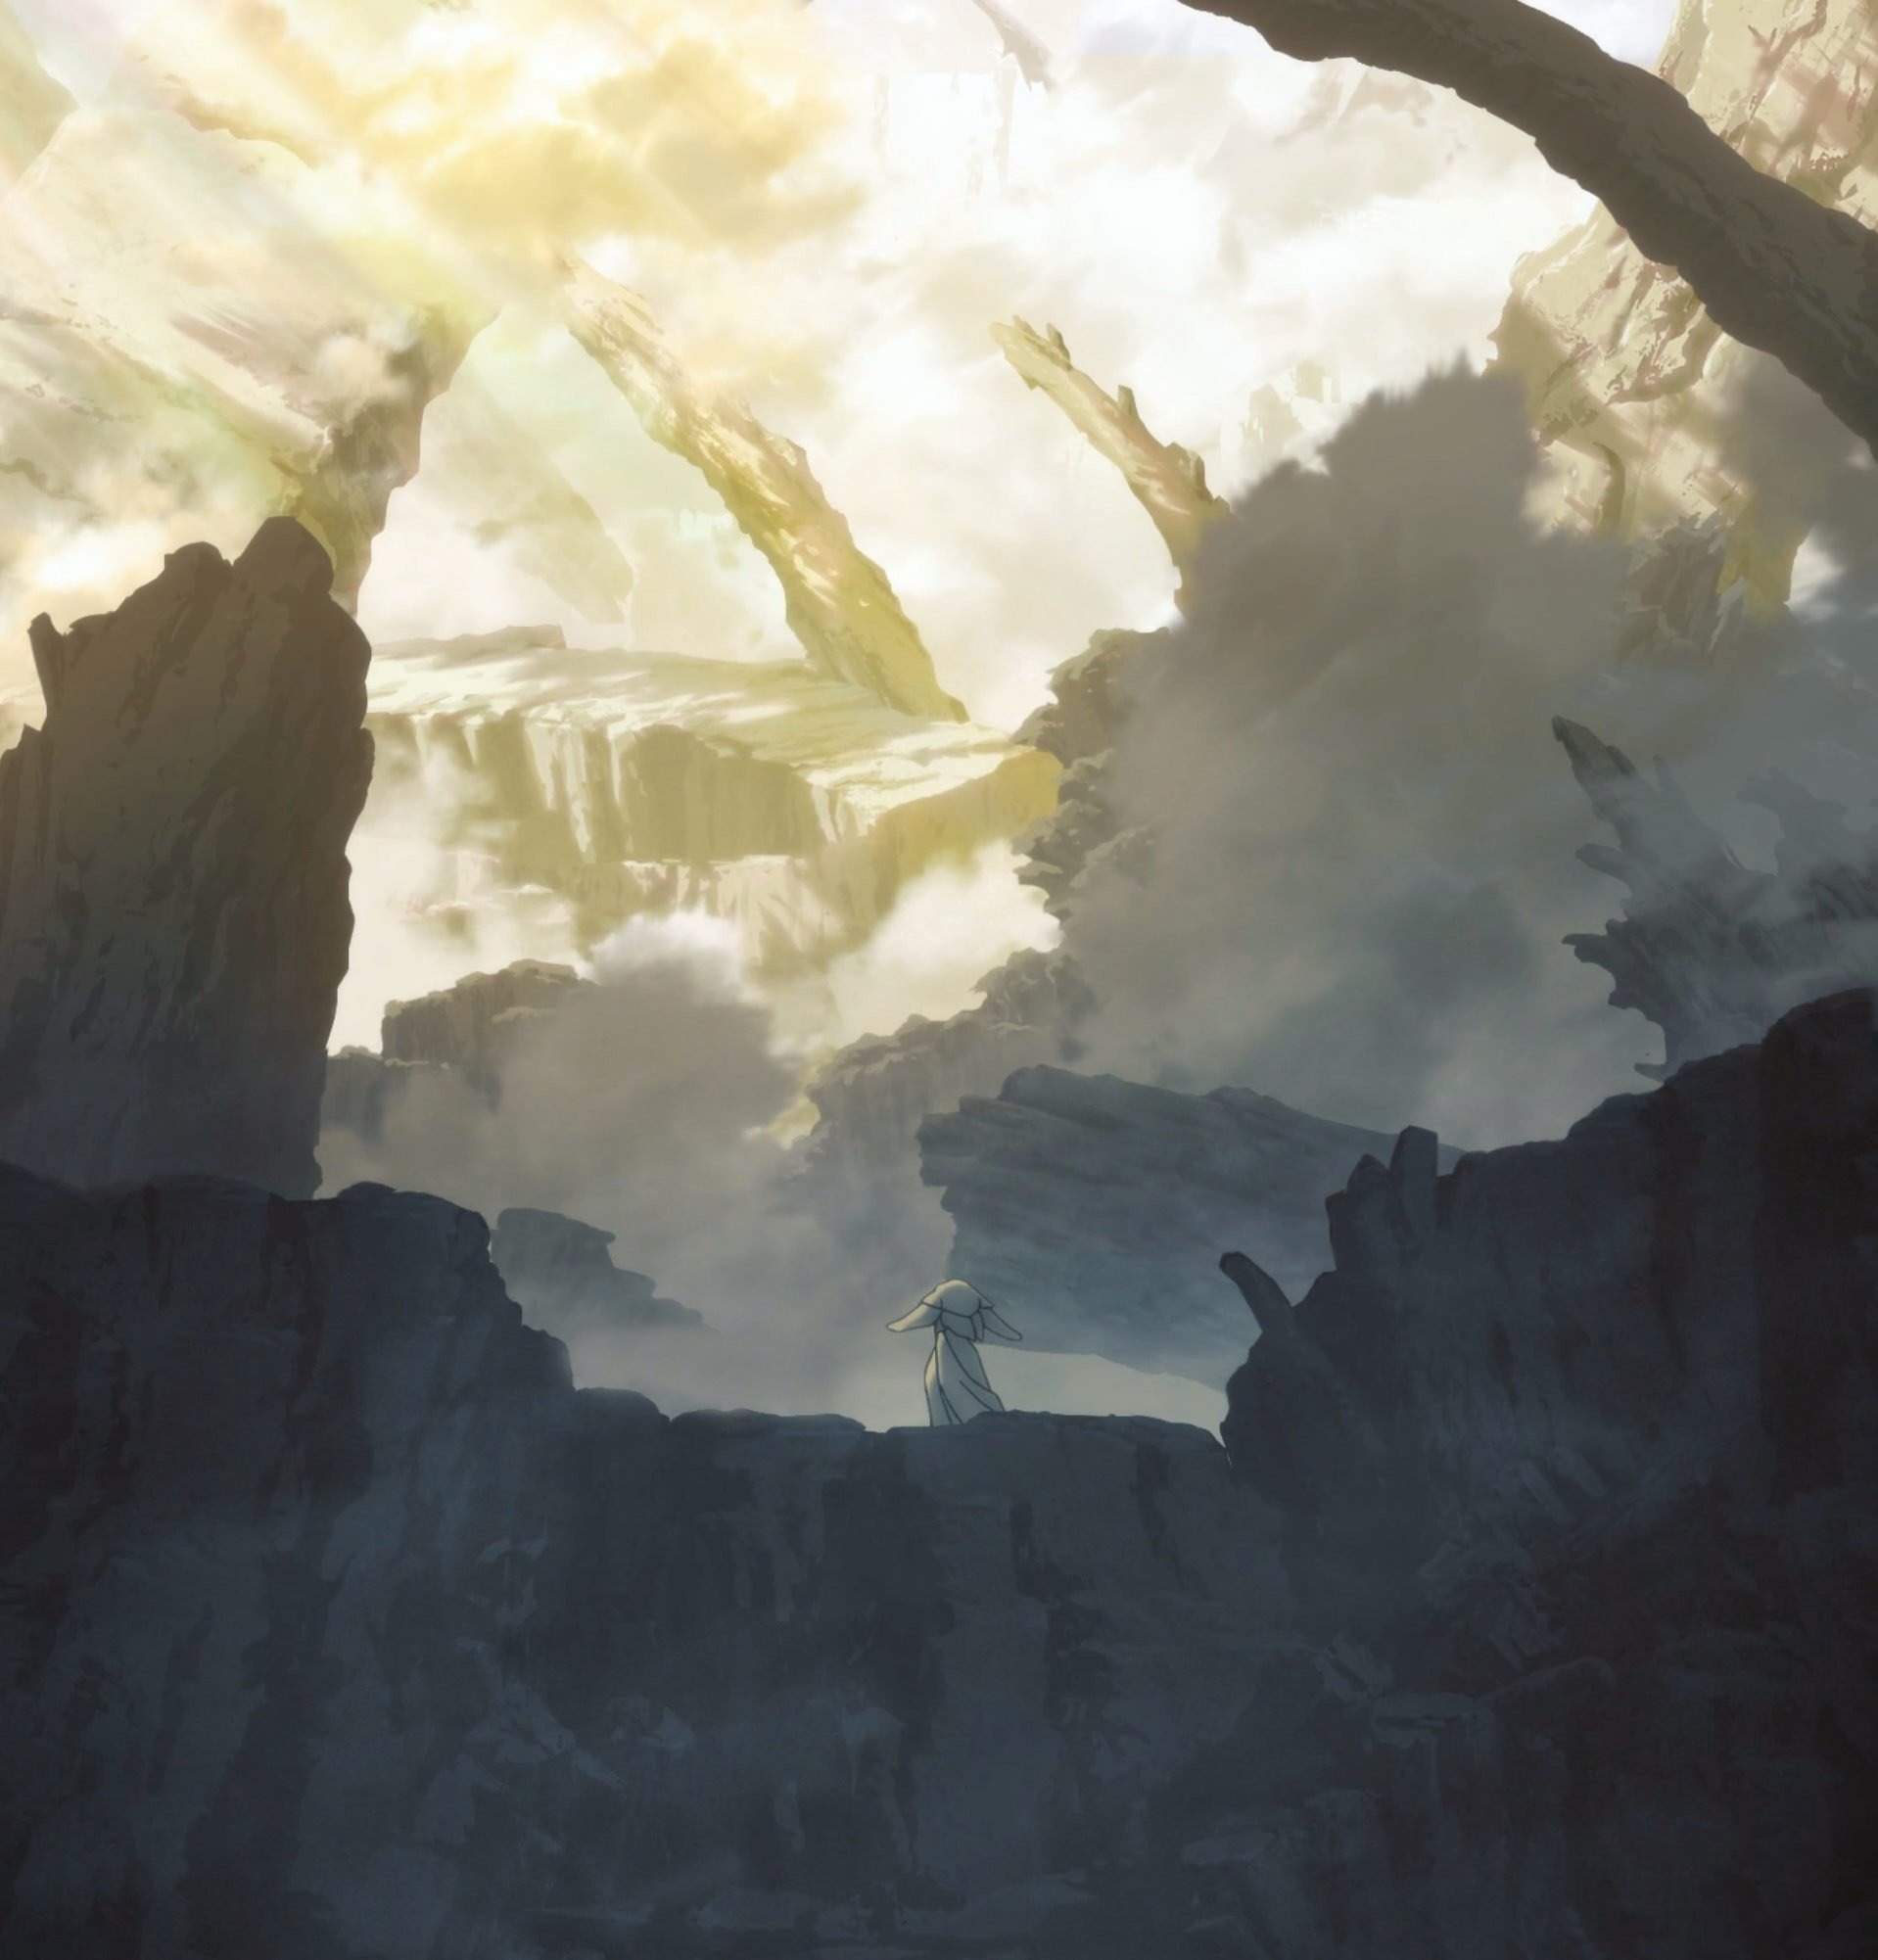 Made in Abyss: Retsujitsu no Ougonkyou Episode 3 Discussion - Forums 